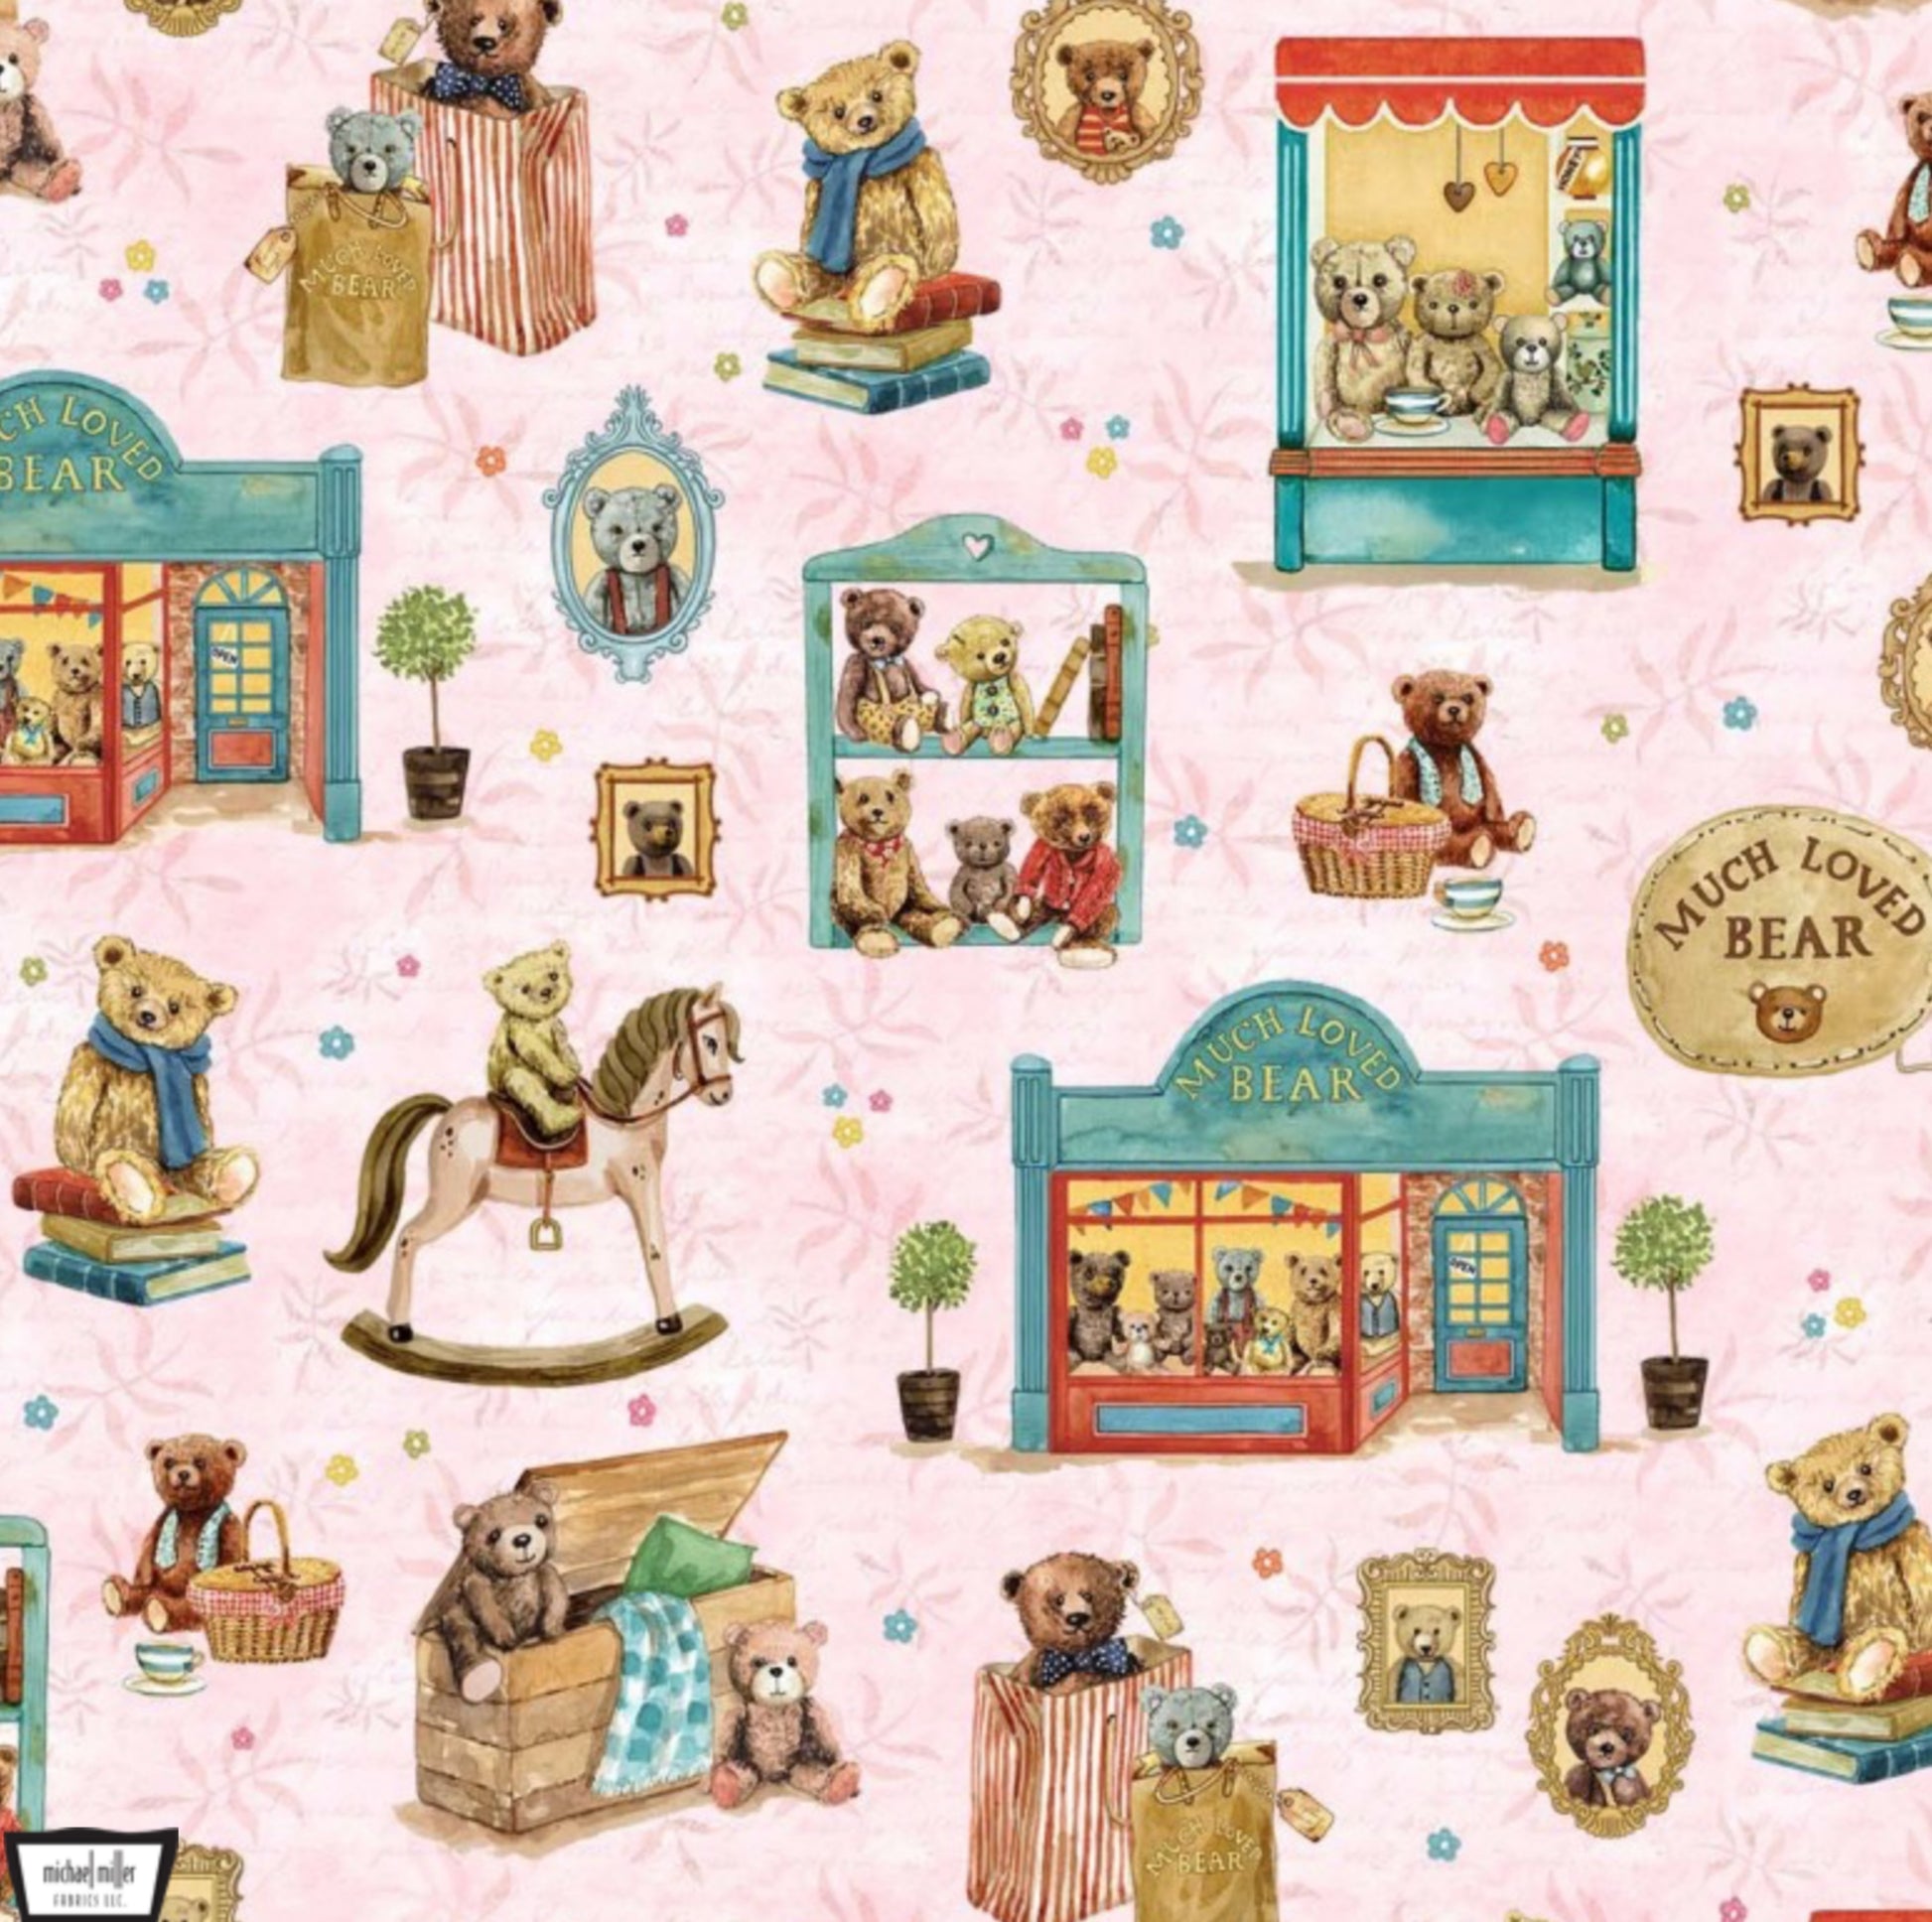 Paws for Thought Fabric from the Much Loved Bear Collection by Louise Nisbet for Michael Miller Fabrics. Teddy Bear fabric on a light pink cotton fabric.